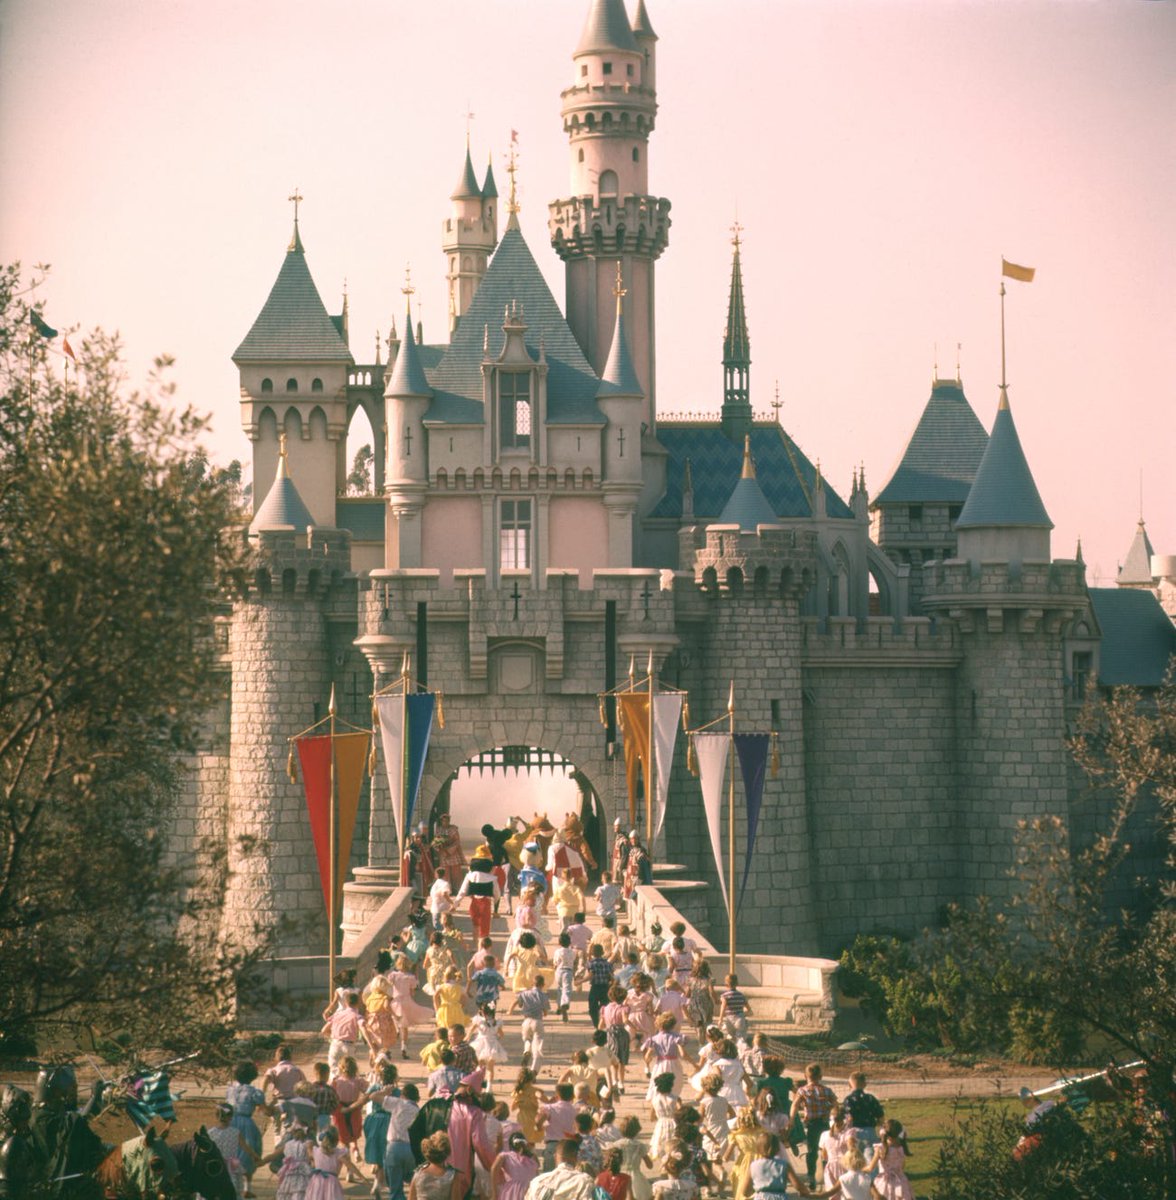 The Sleeping Beauty Castle also ran into some issues, almost burning down at Disneyland due to a gas leak. 